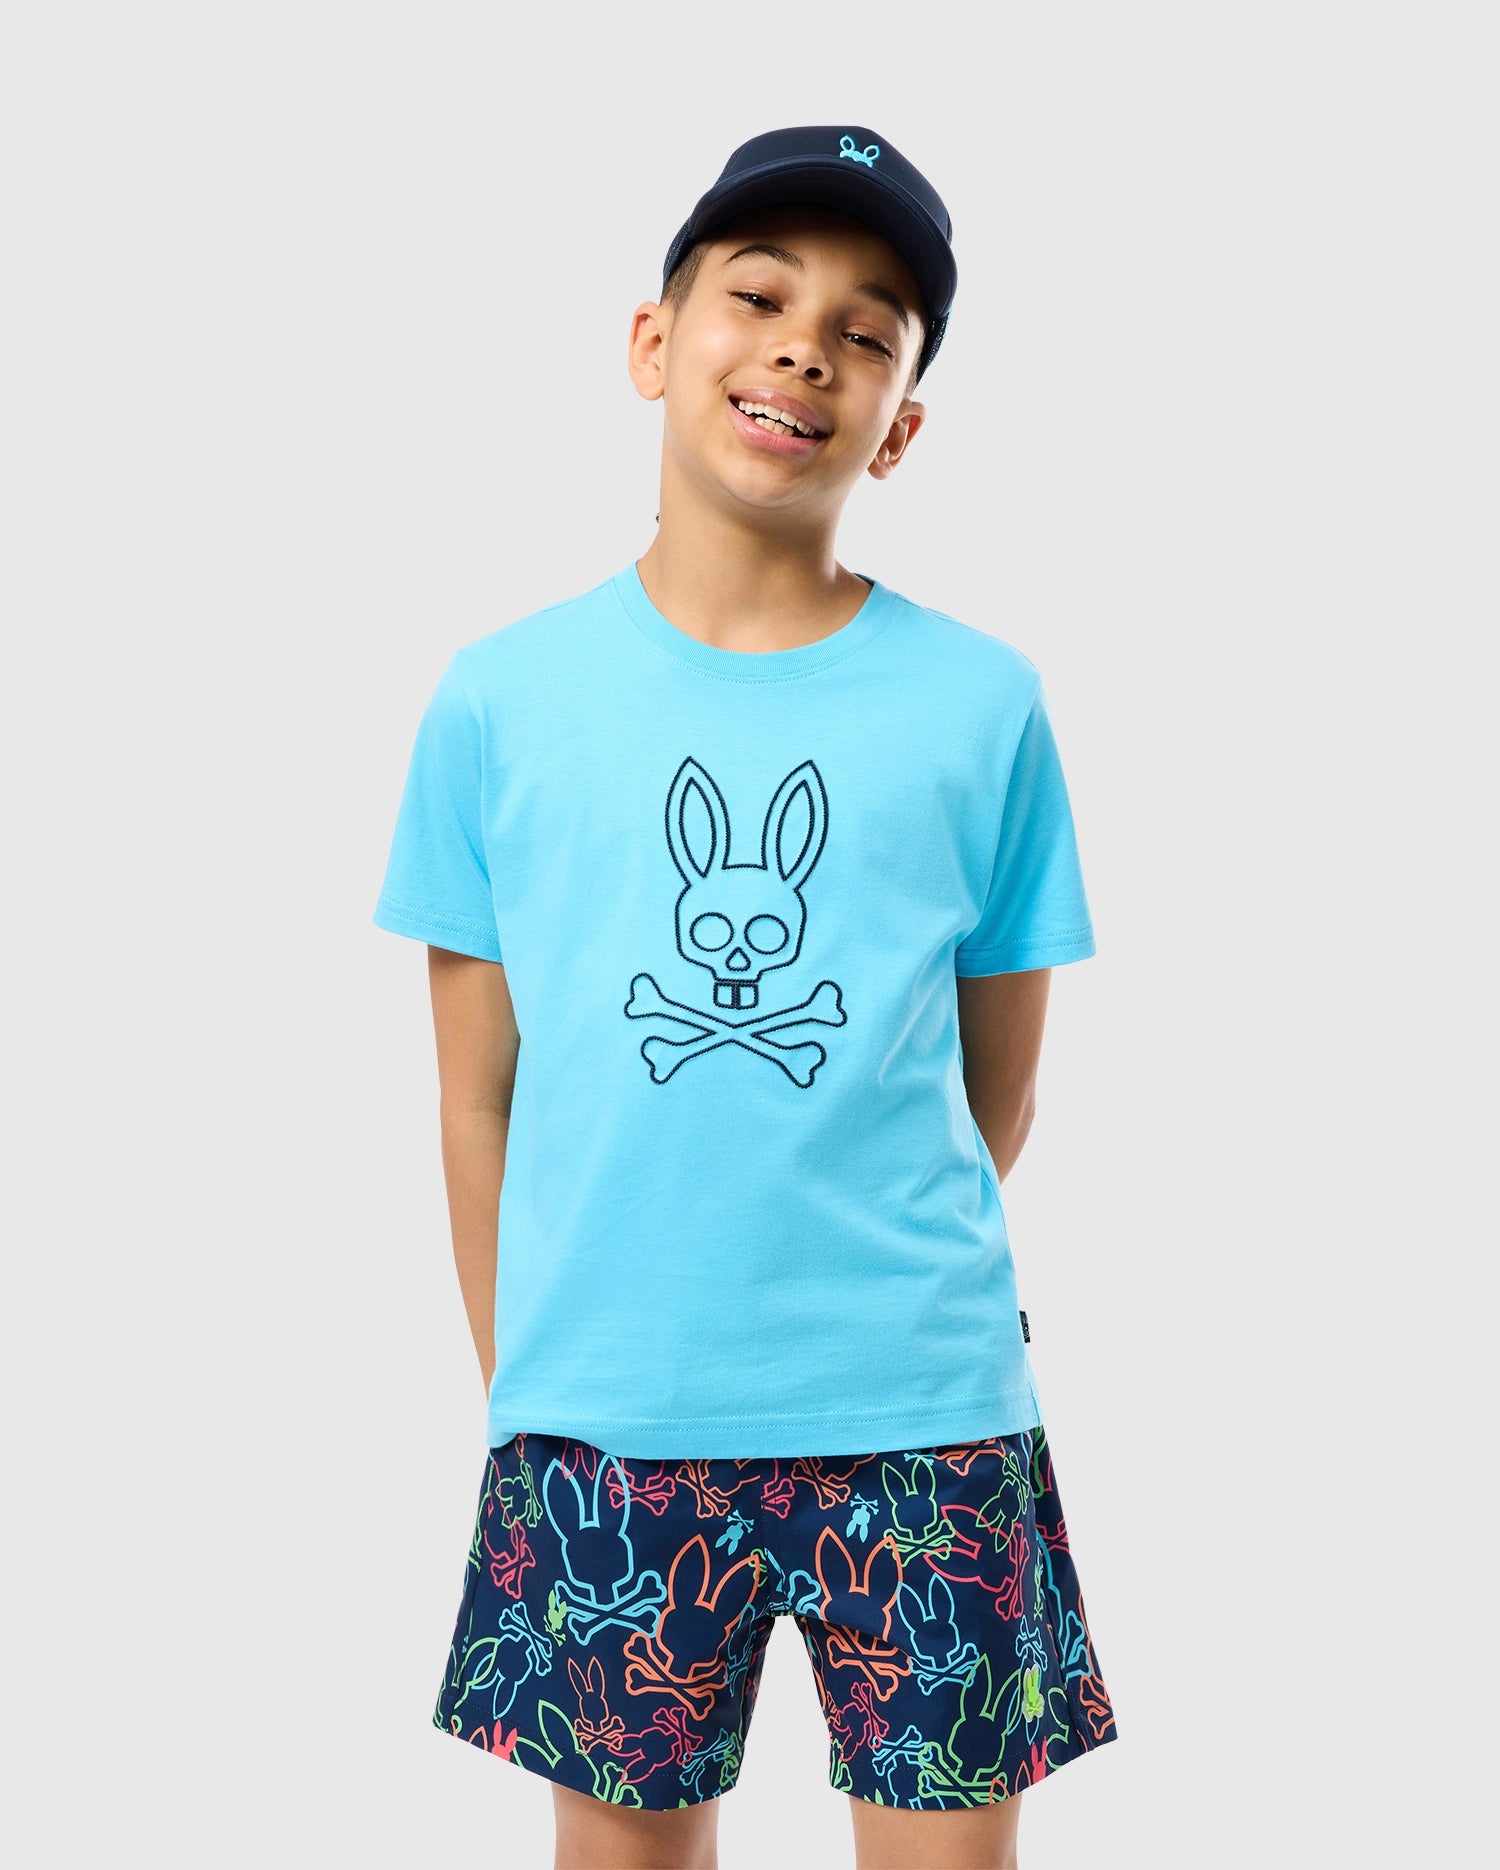 A young boy wearing a light blue Psycho Bunny KIDS SHELDON GRAPHIC TEE - B0U569C200 featuring a skull and crossbones design with bunny ears stands against a plain background. He sports a navy blue cap and colorful shorts with a bunny pattern in various neon colors, smiling with his hands behind his back.